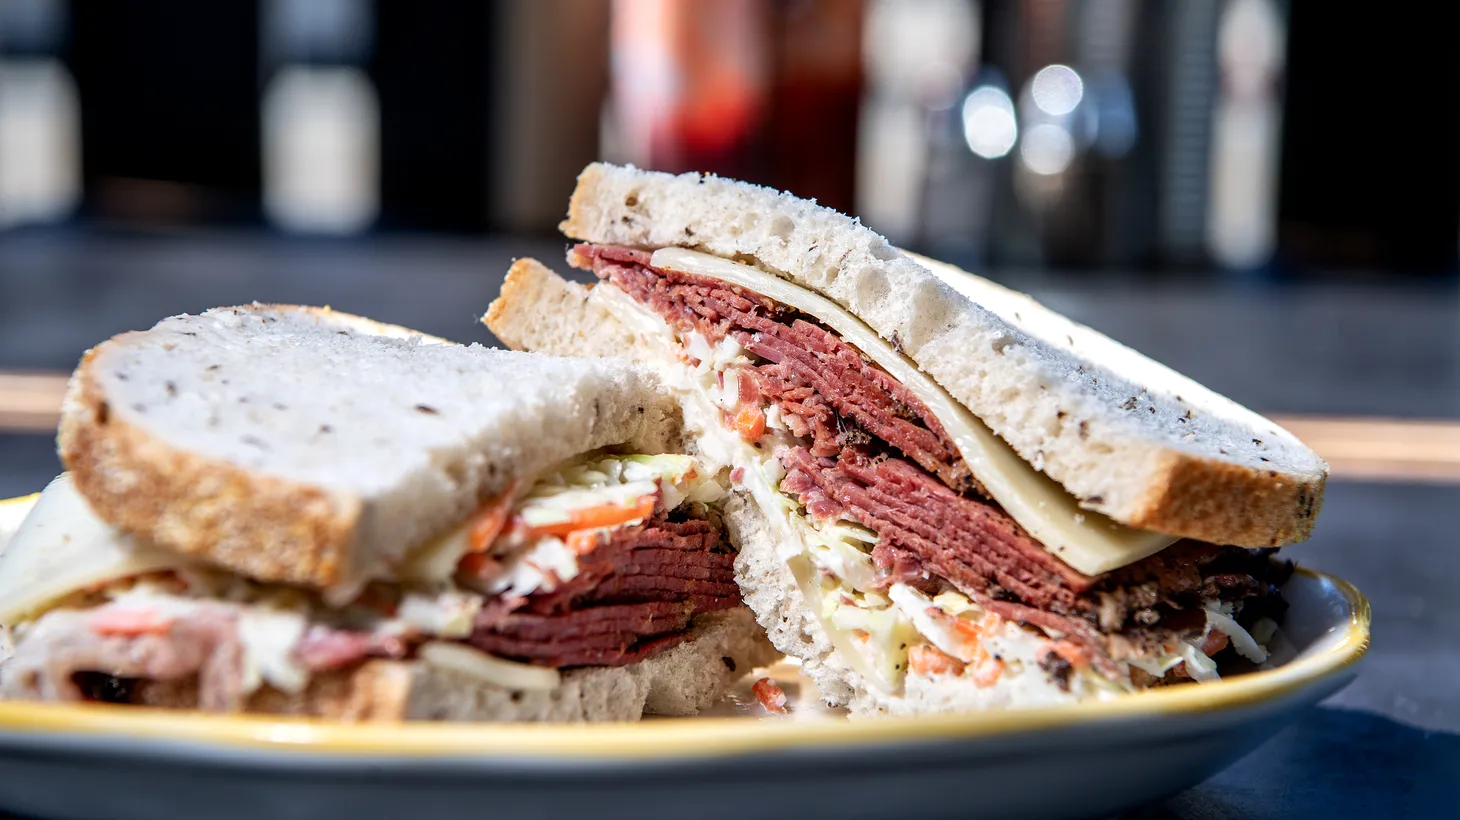 Wise Sons in Culver City pays homage to Langer’s famous No. 19 pastrami sandwich.